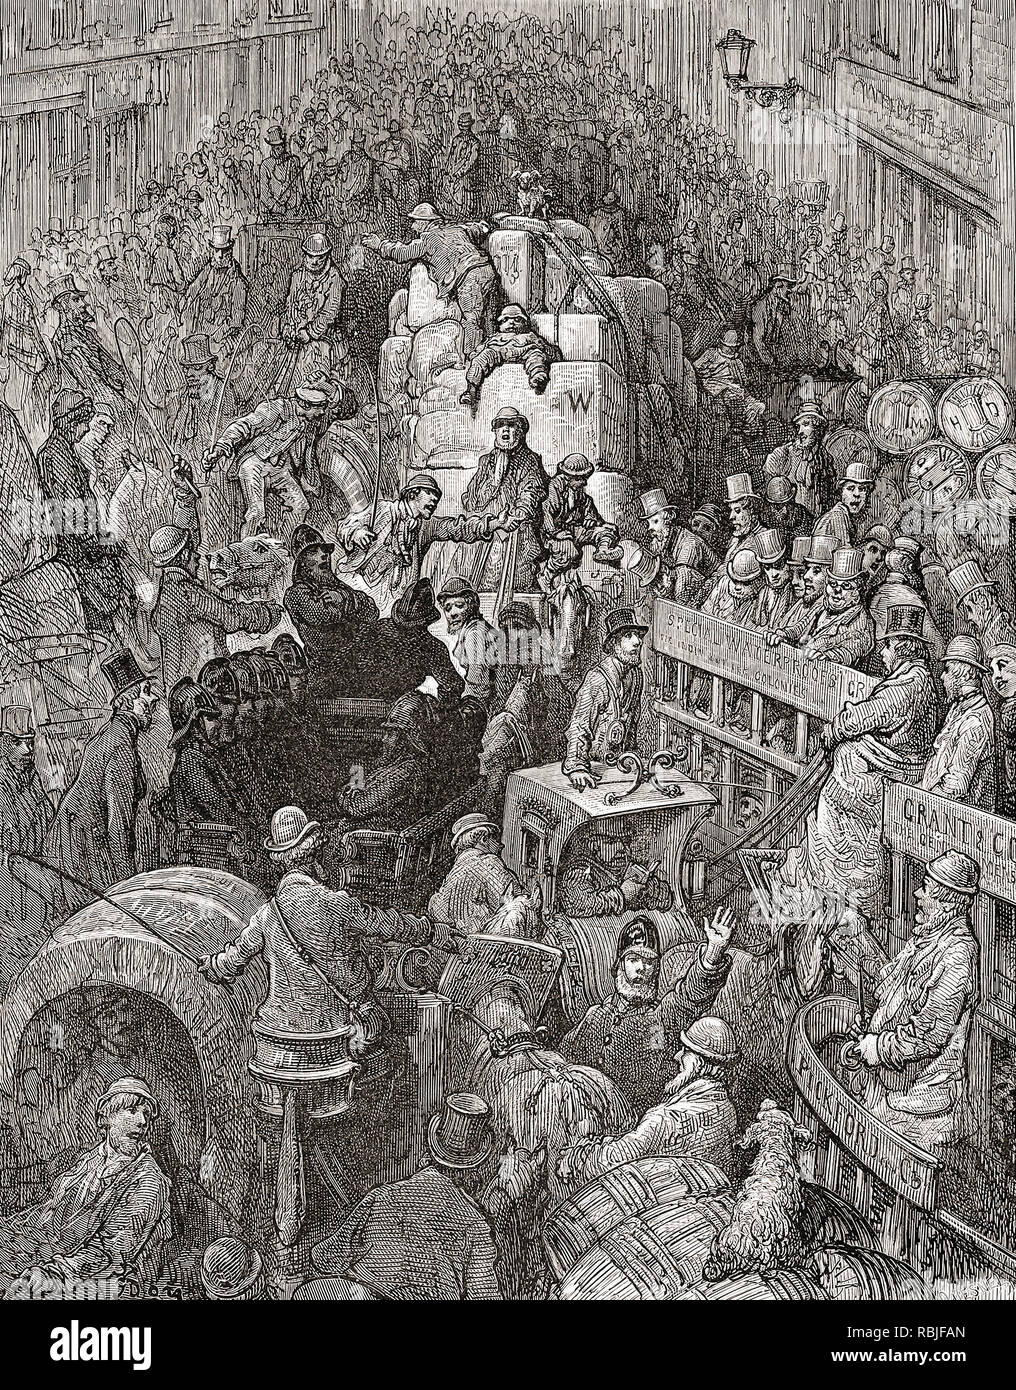 Crowded London street, circa 1869, by French artist Gustave Dore, who worked with British journalist Blanchard Jerrold to produce the book London: A Pilgrimage. Stock Photo